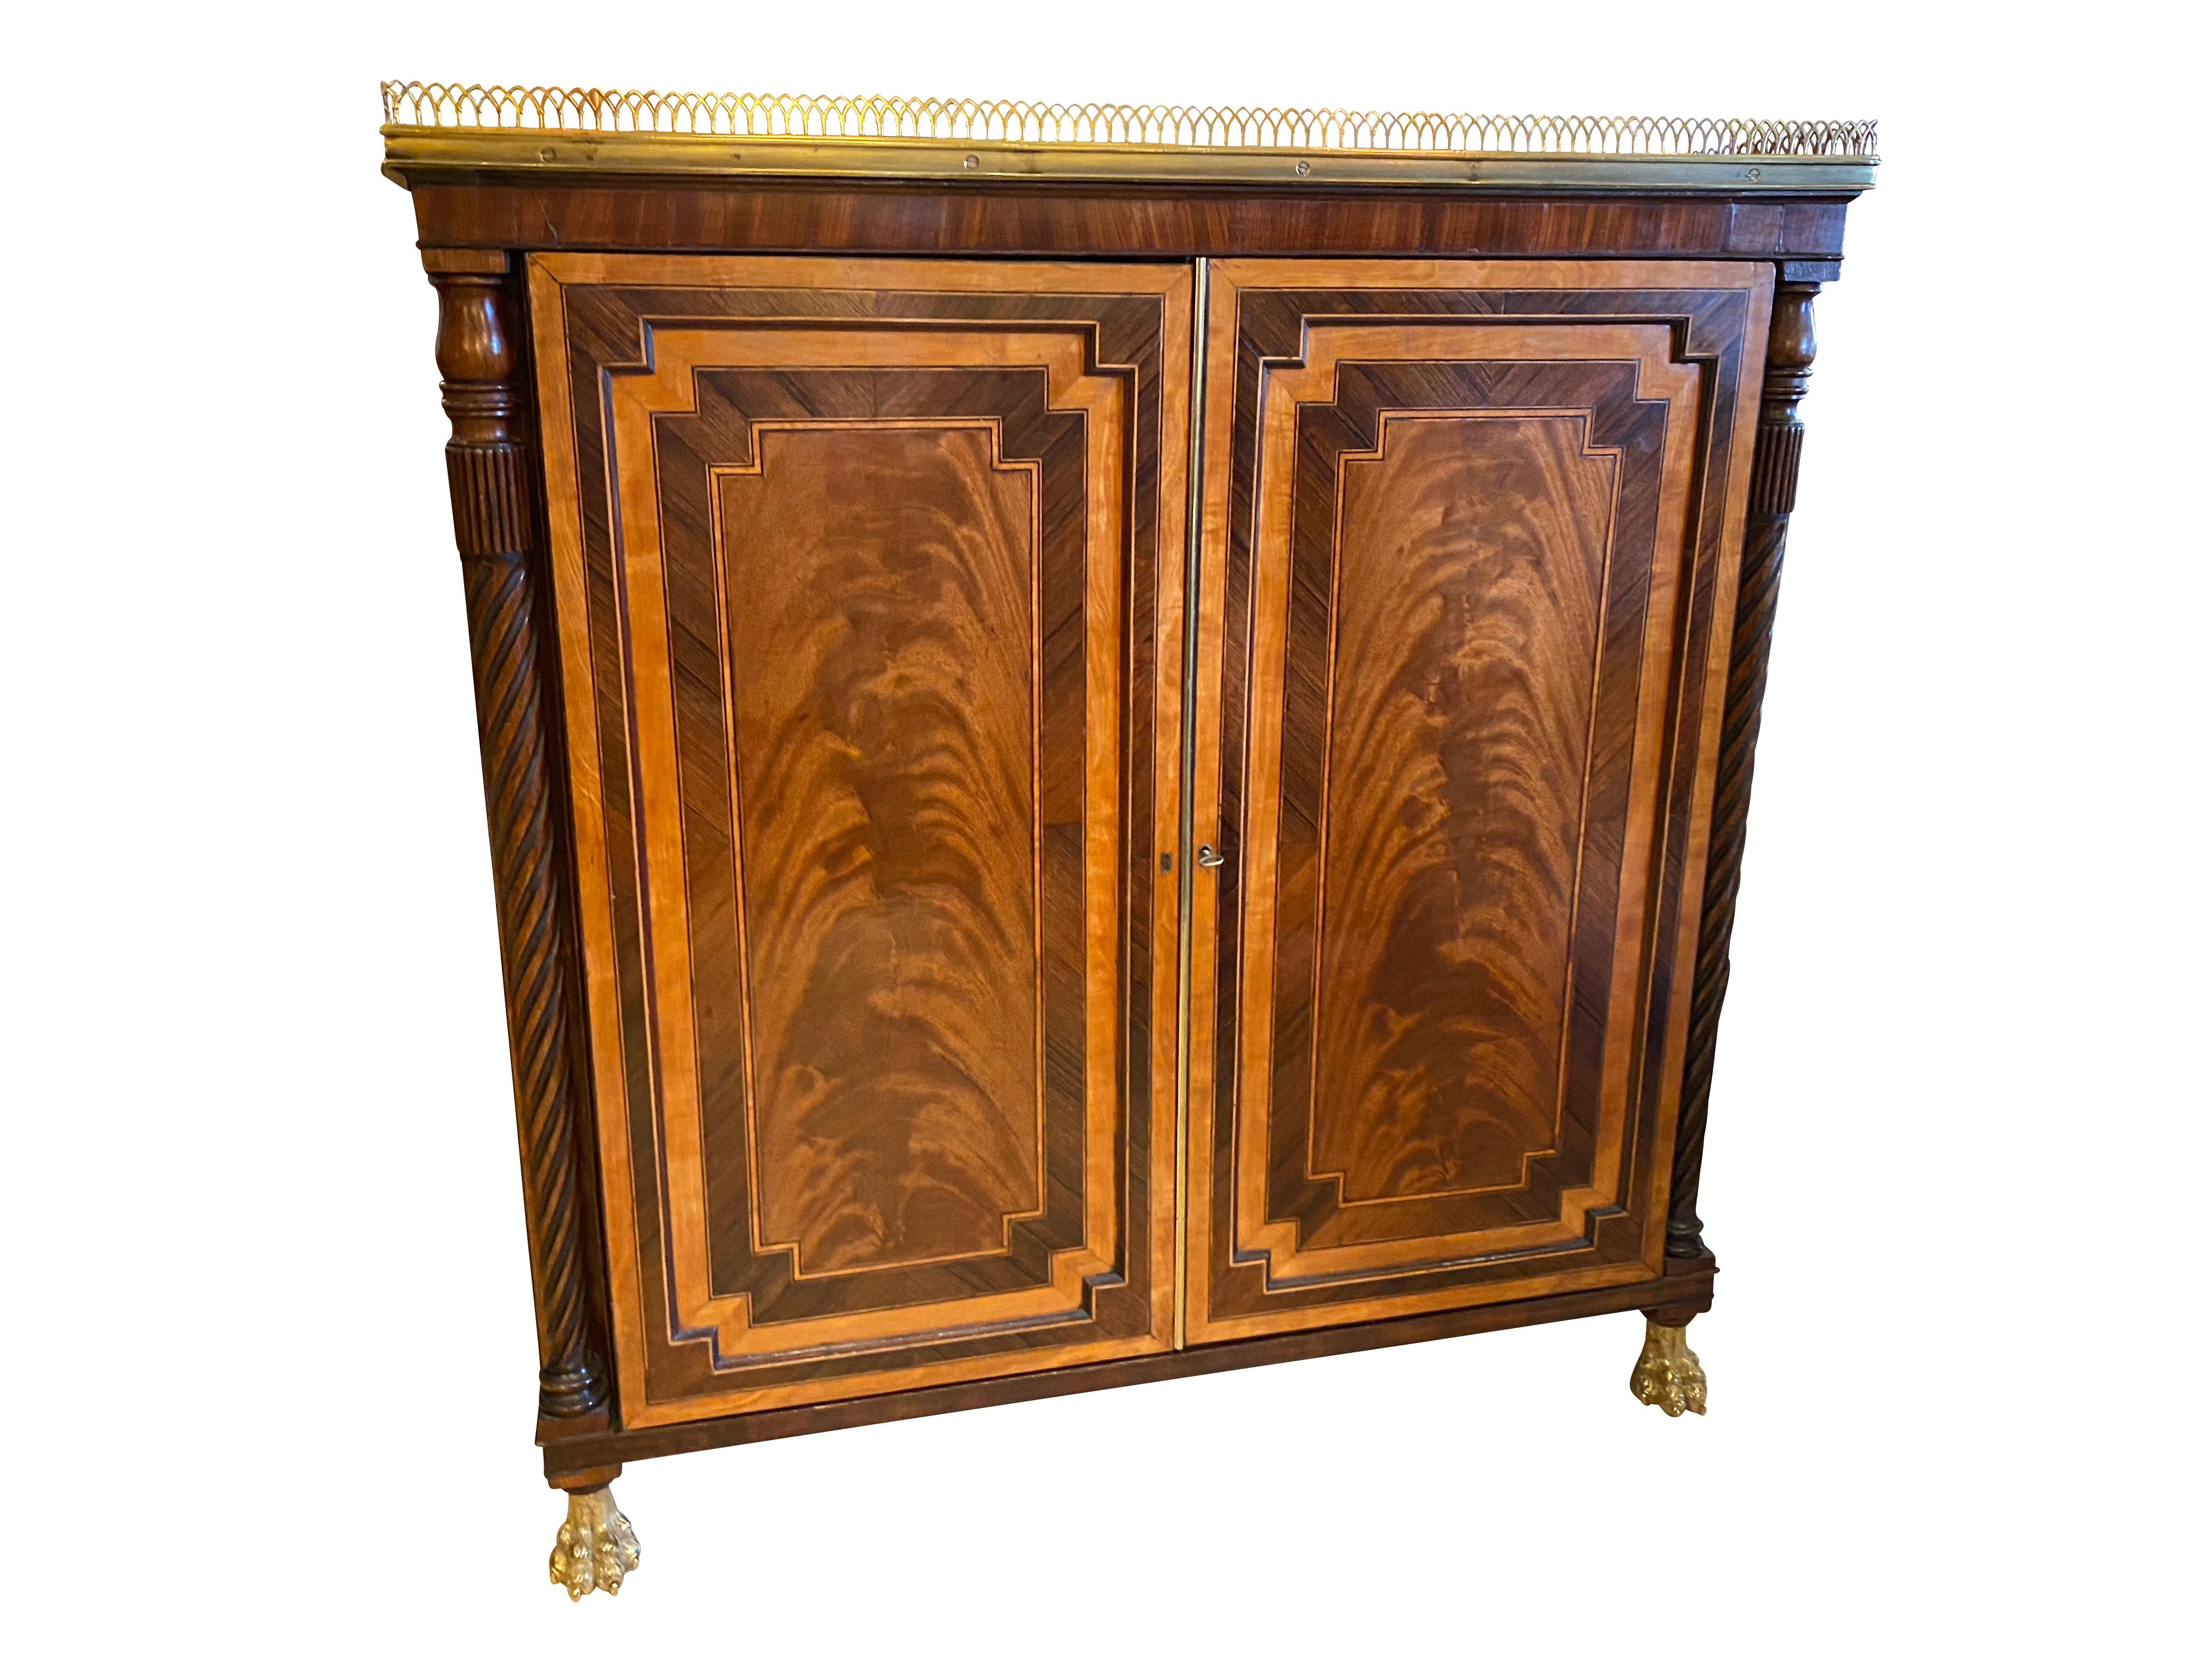 Finely constructed with choice veneers with crossbanded top with brass 3/4 gallery over a pair of paneled doors with a pair of opposing doors with pleated fabric, each corner with reeded columns, brass paw feet.